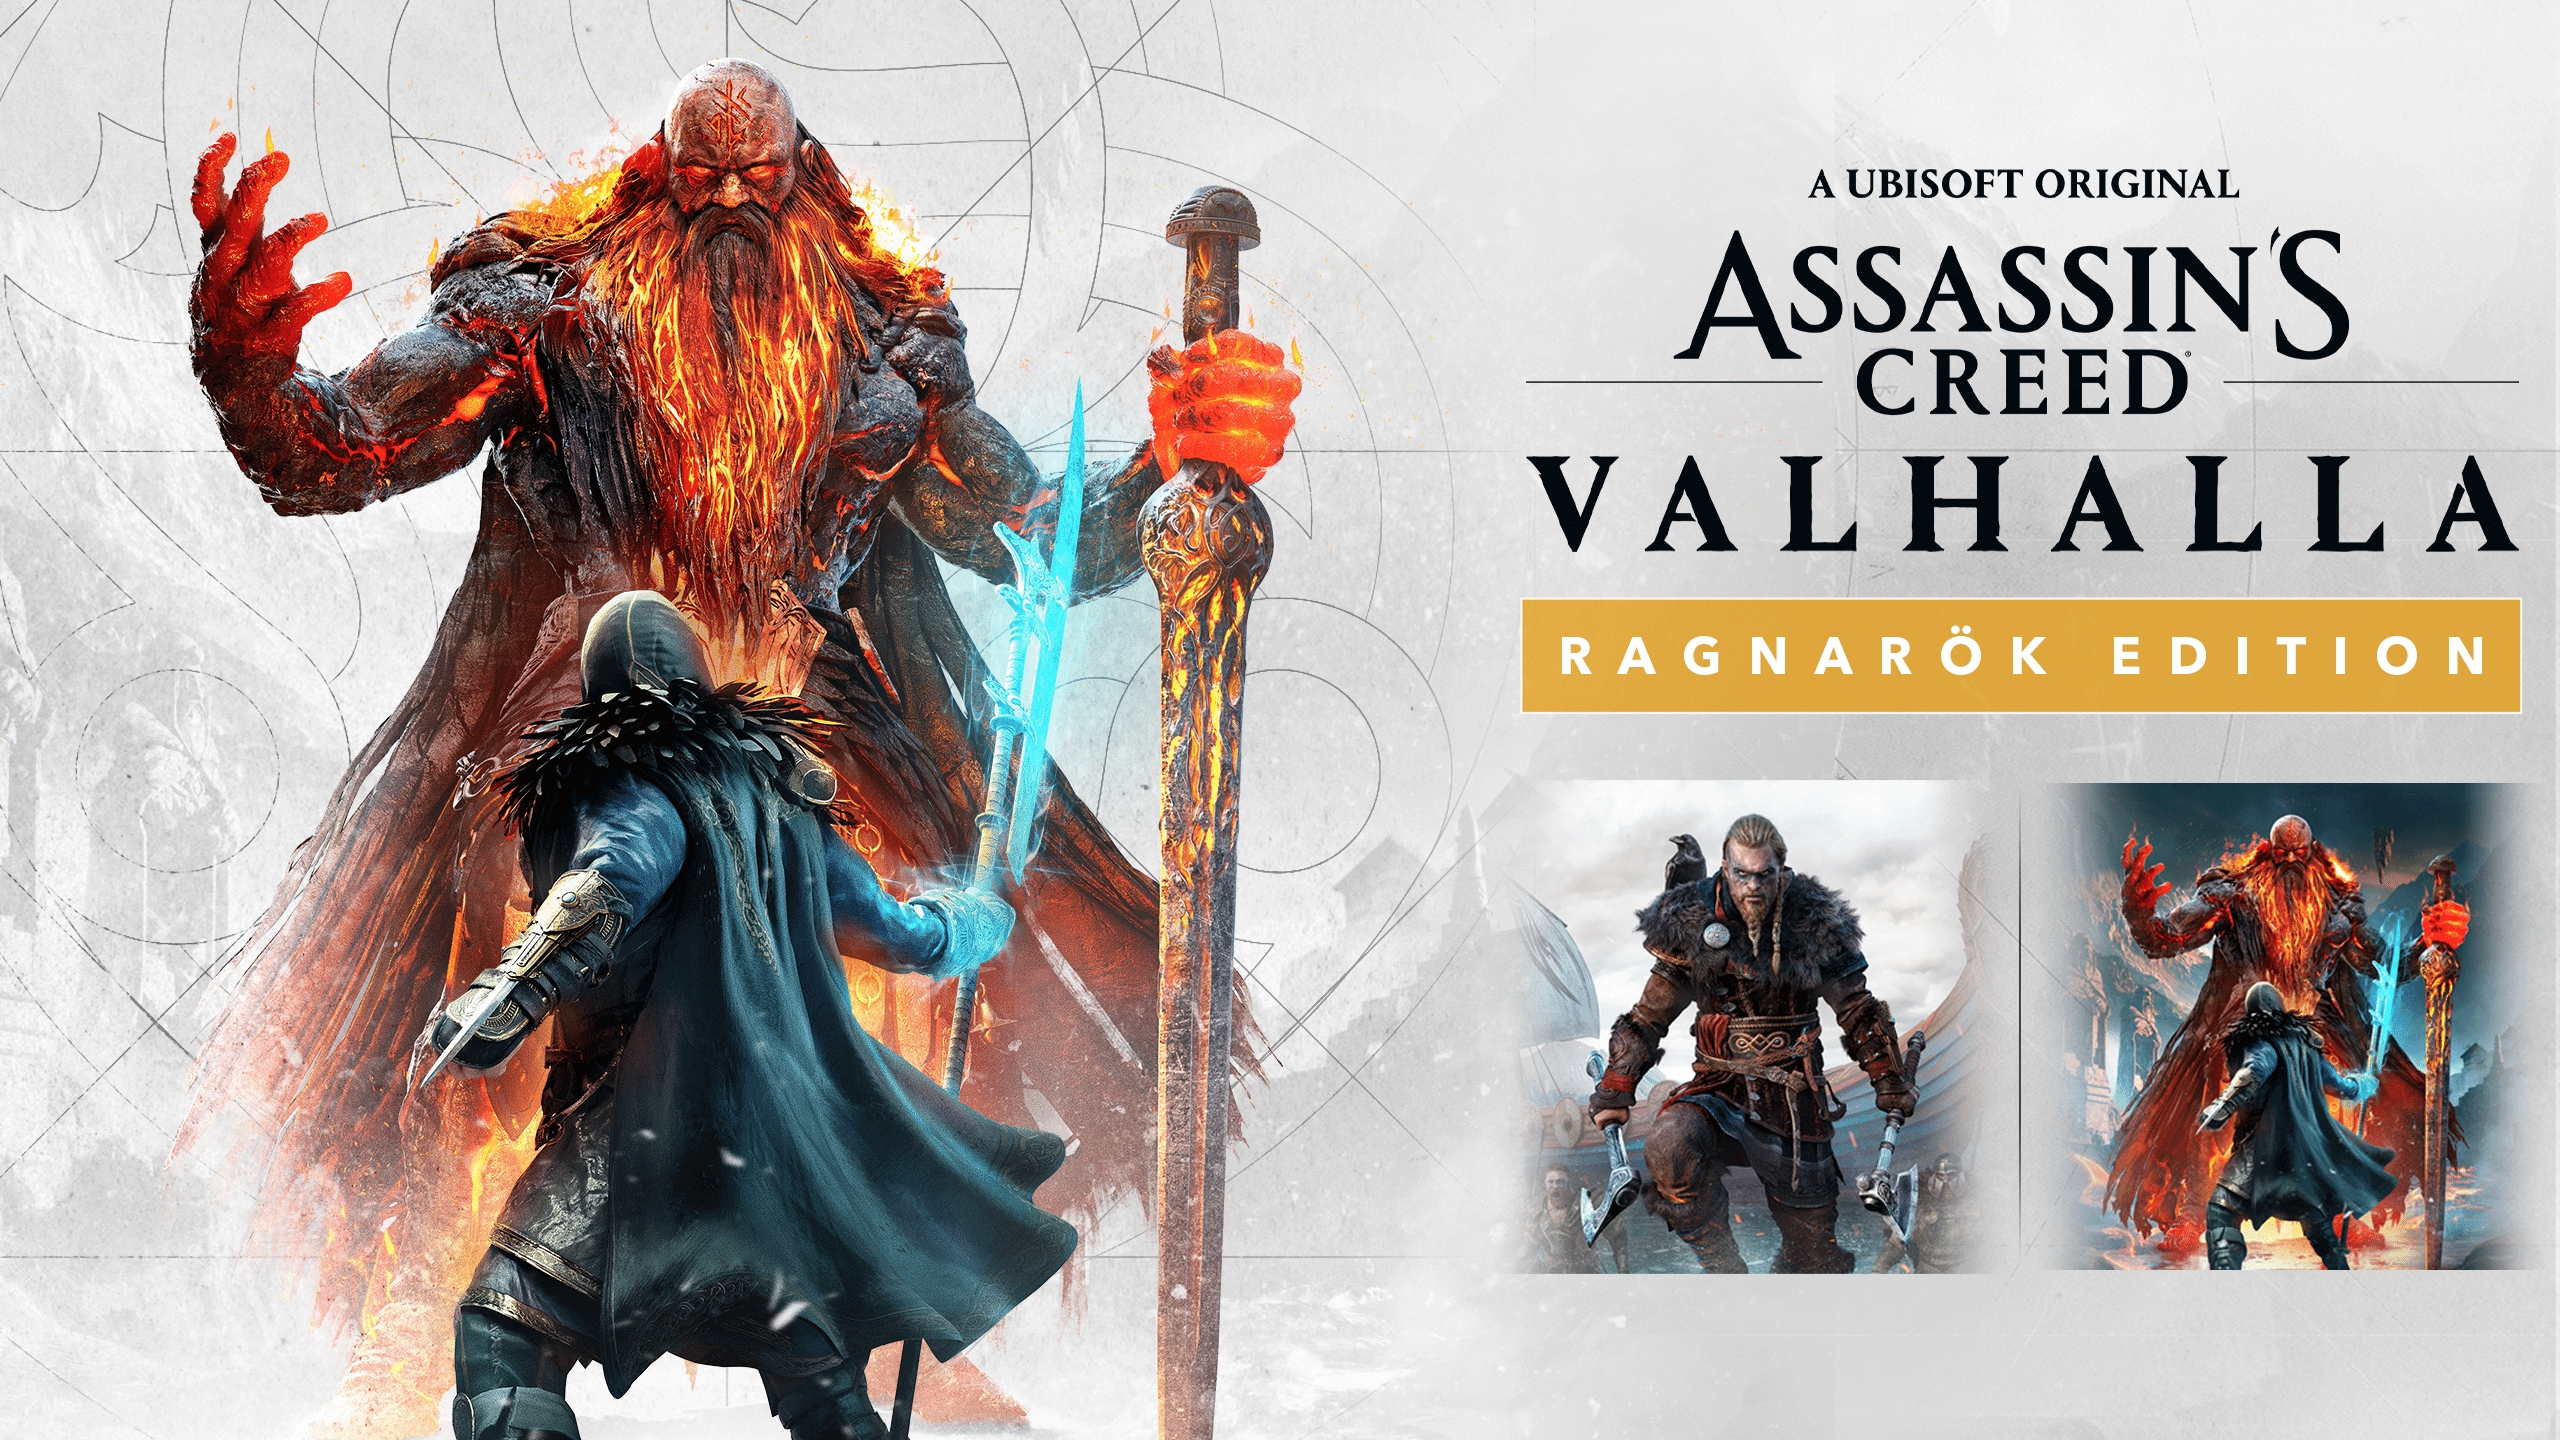 ASSASSIN'S CREED VALHALLA PS4 REVIEW: Sometimes Brilliant